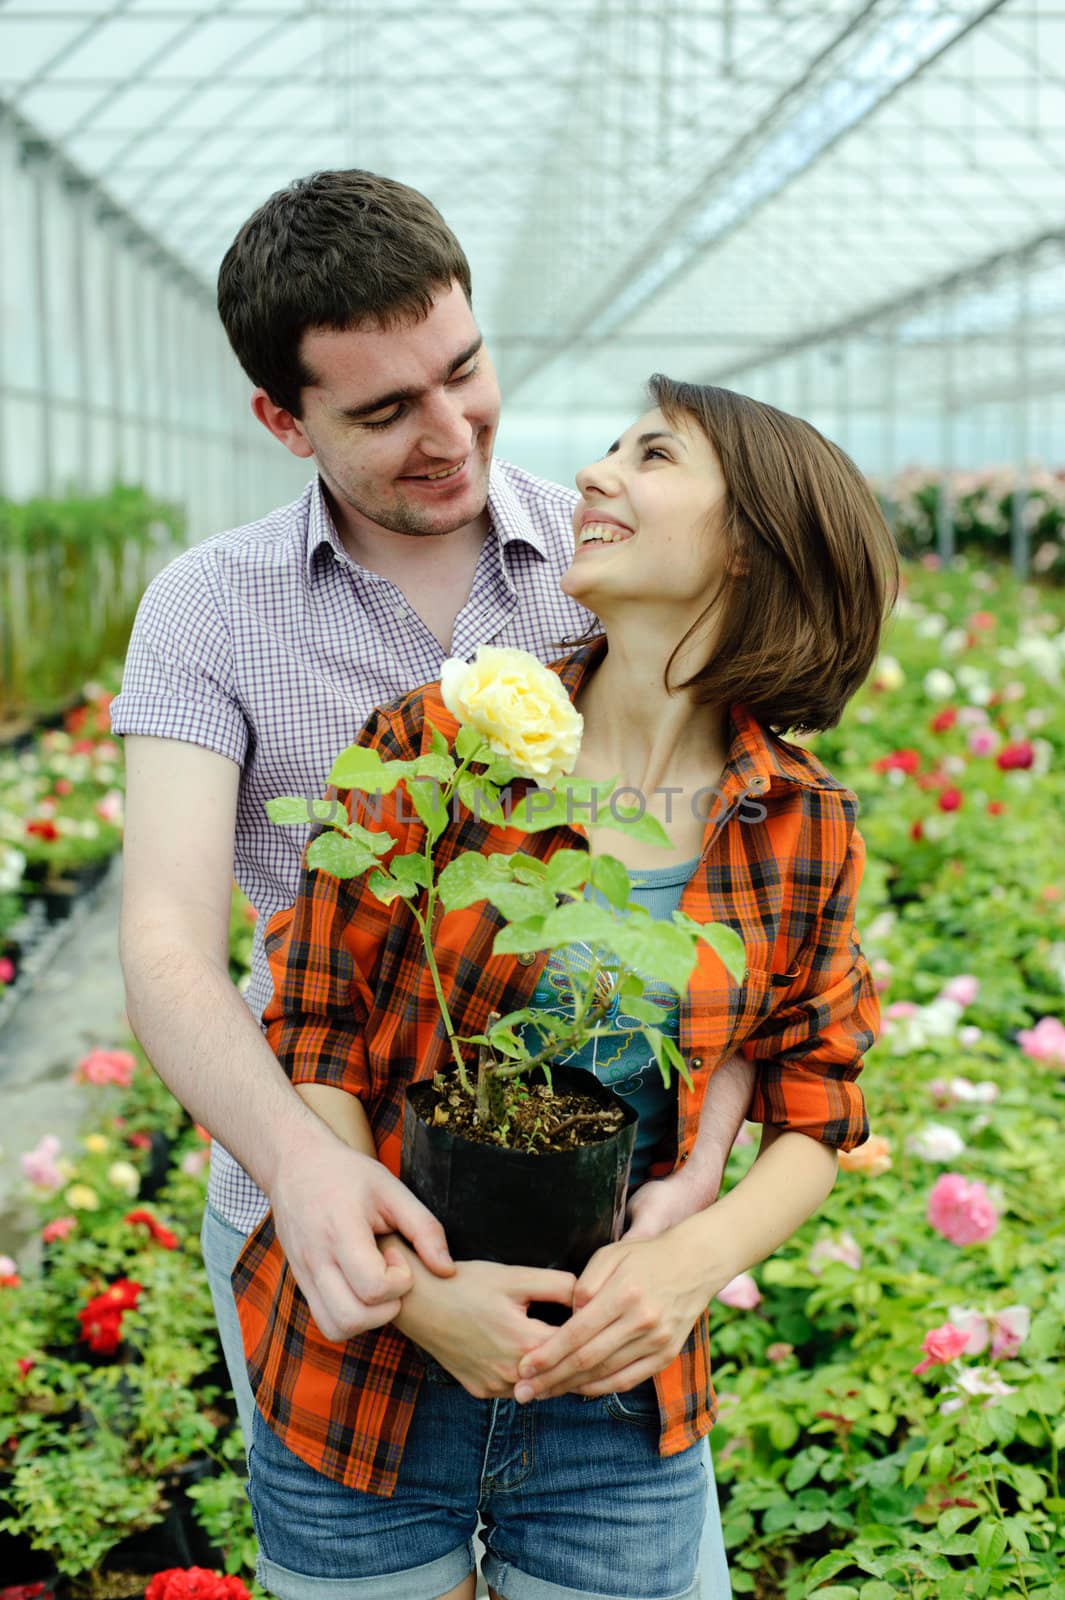 An image of a young couple with a flower pot